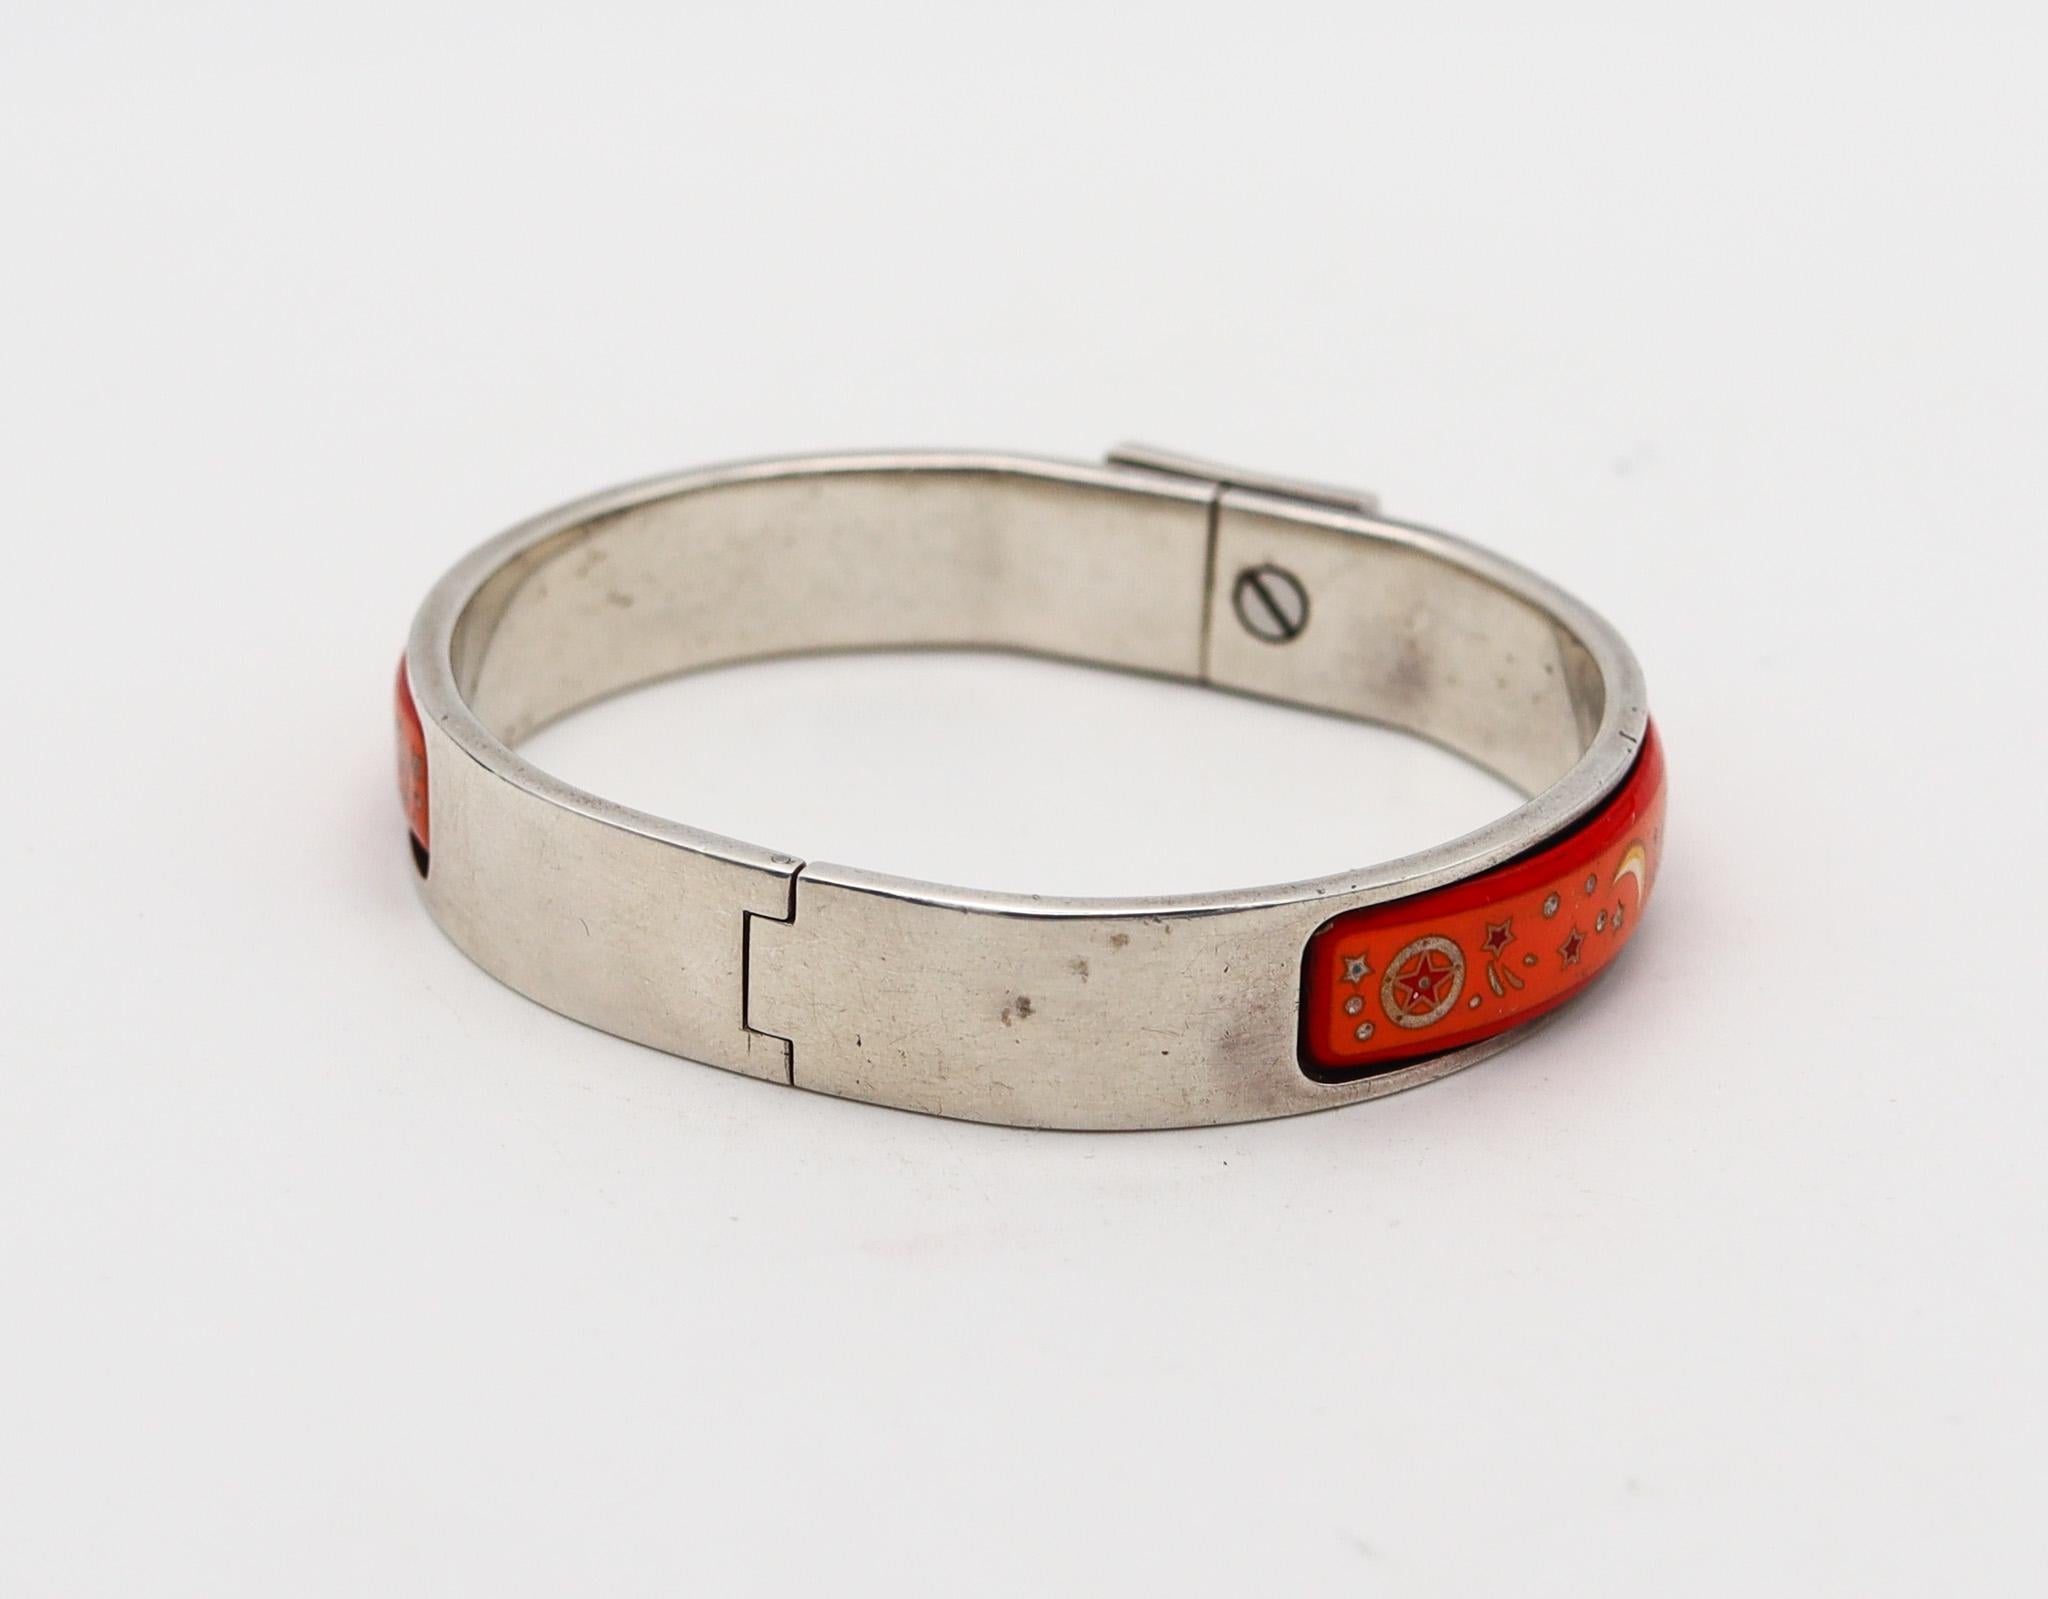 Hermes Paris 1990 Clic Clac Bangle Bracelet In .925 Sterling Silver With Enamel For Sale 2